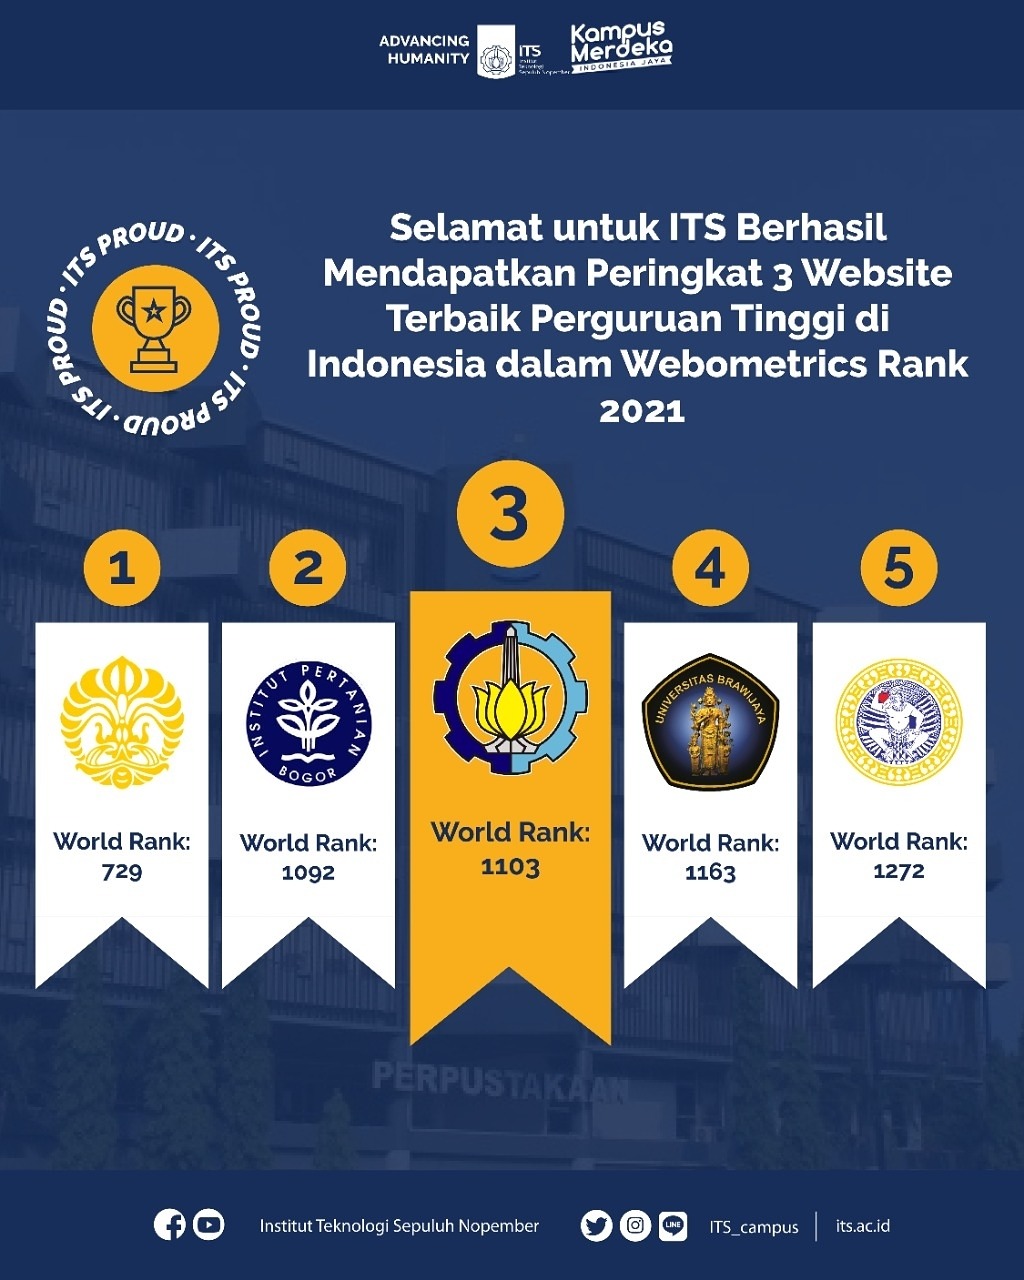 ITS scoring results on the top three Webometrics Ranking Web of Universities 2021 compared to the other universities in Indonesia